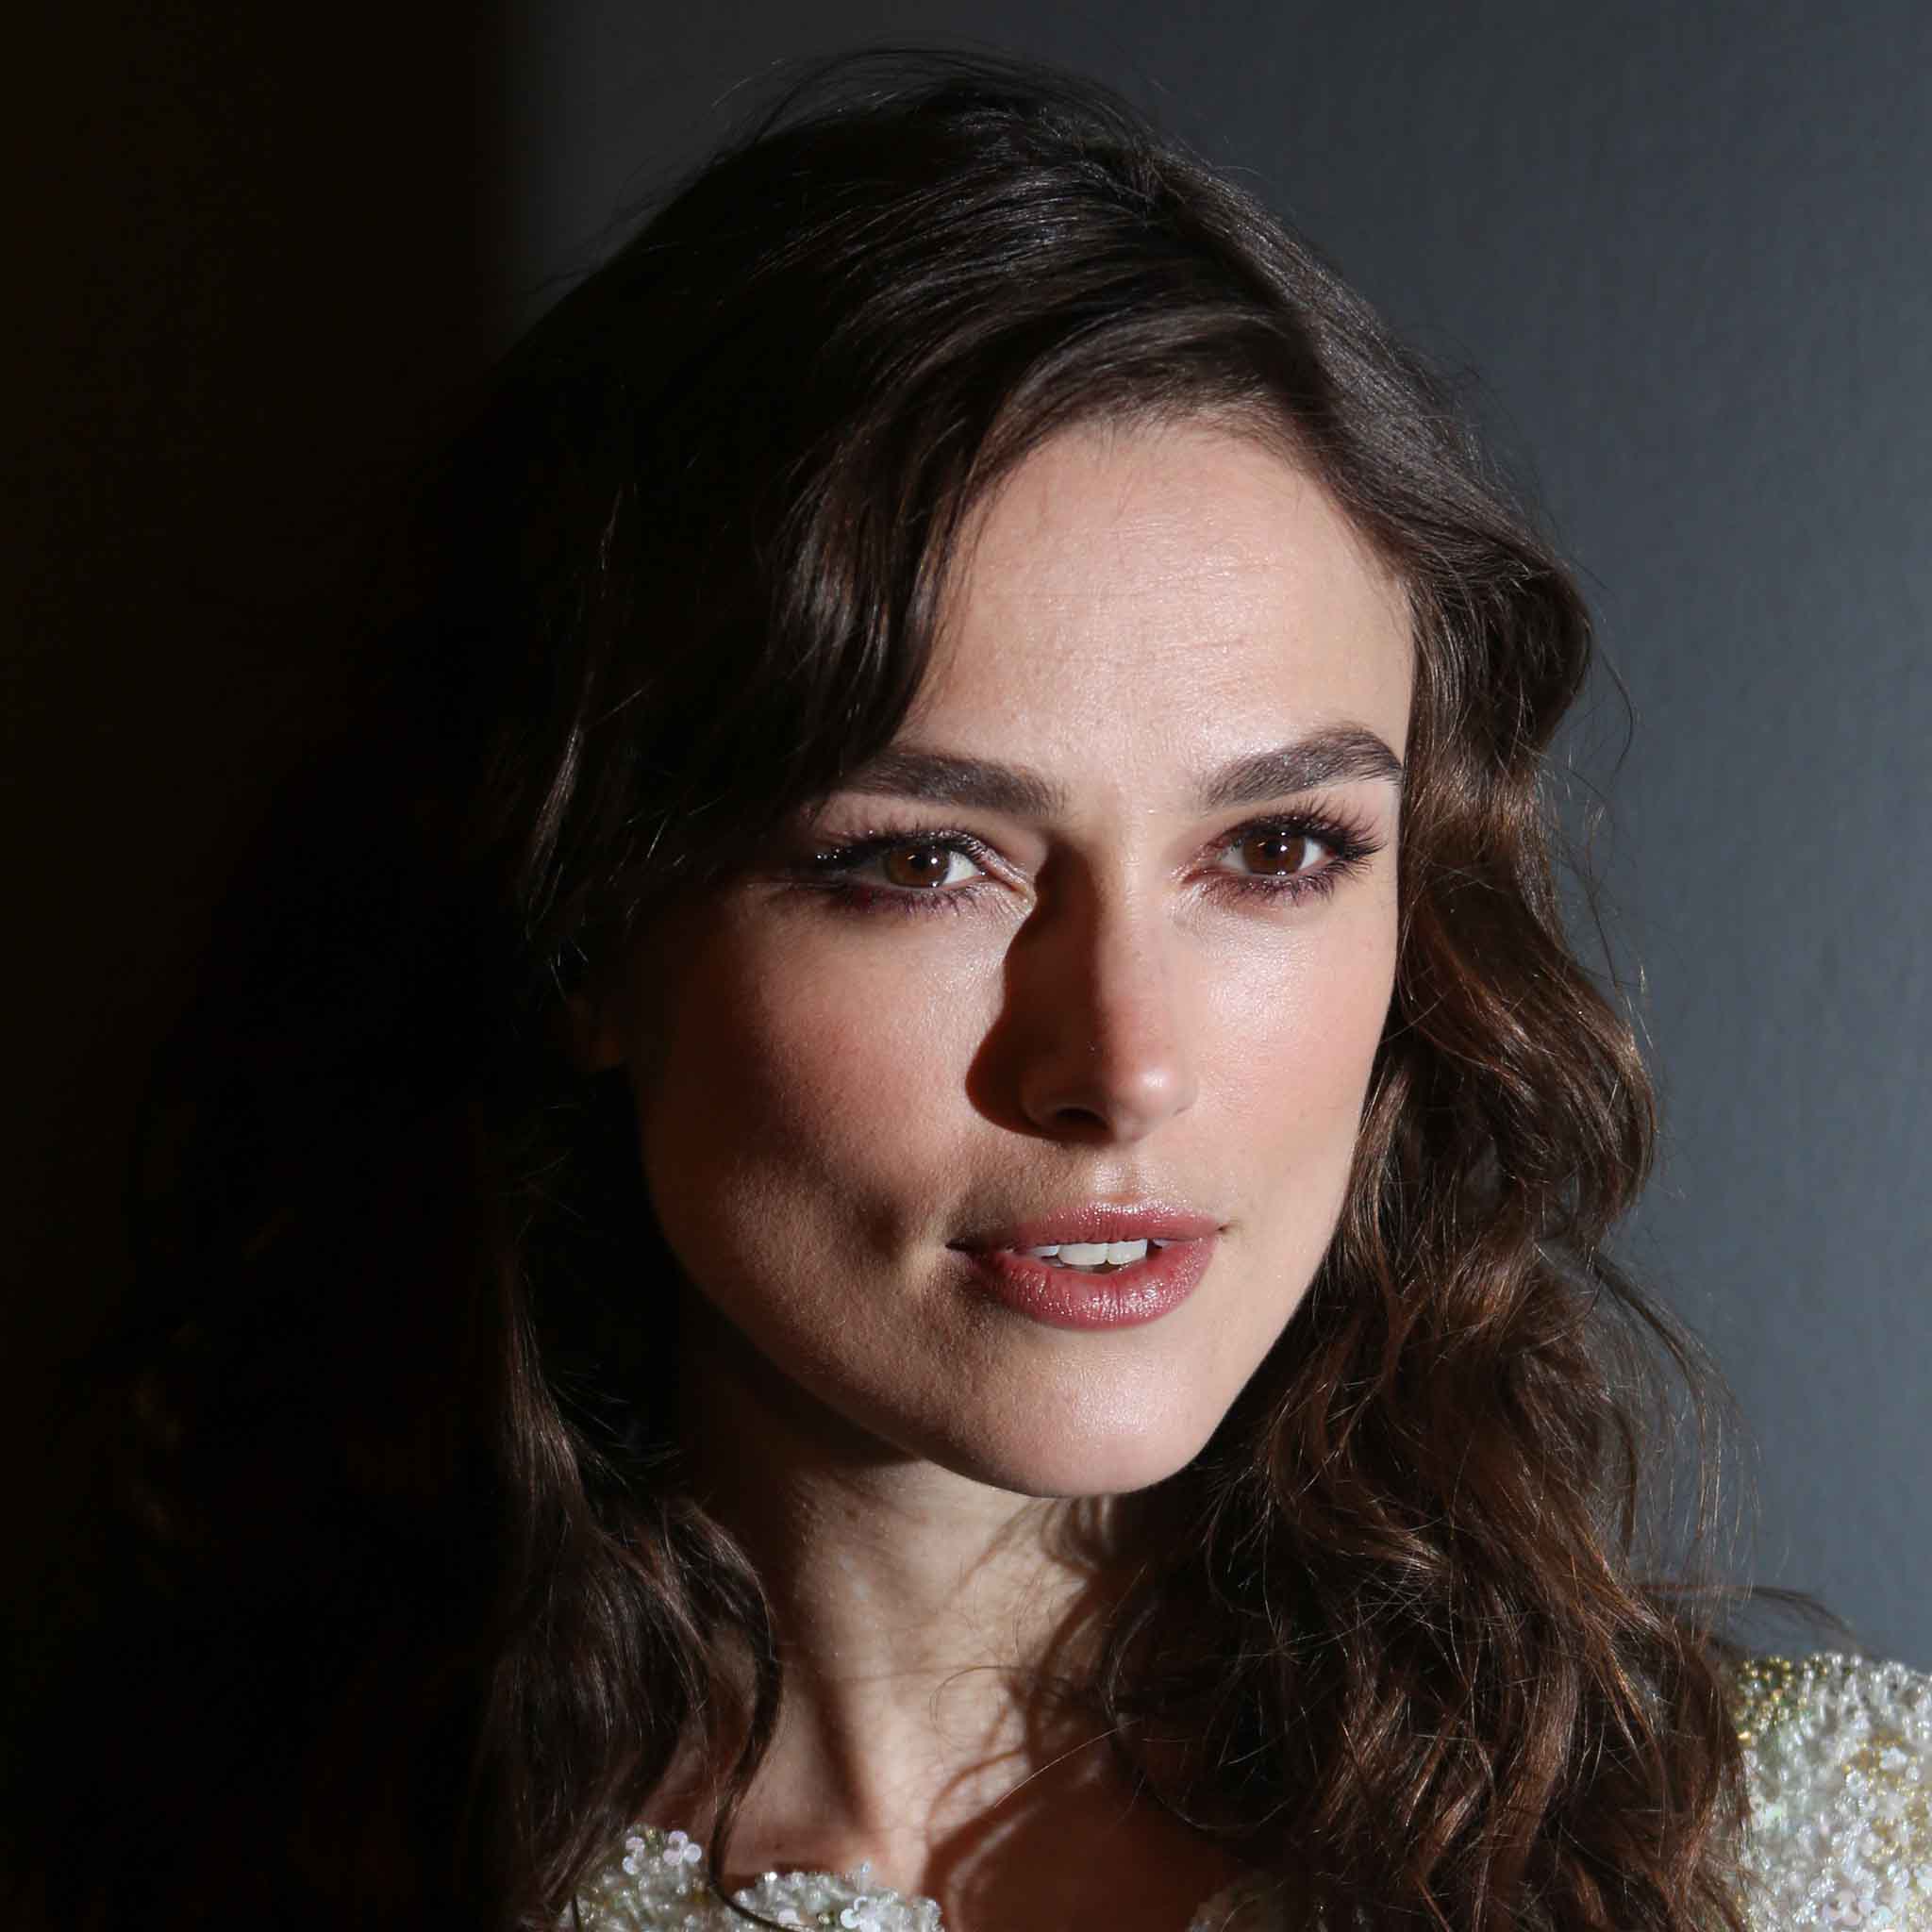 Keira Knightley at the 'Begin Again' film premiere at the 2014 Tribeca Film Festival